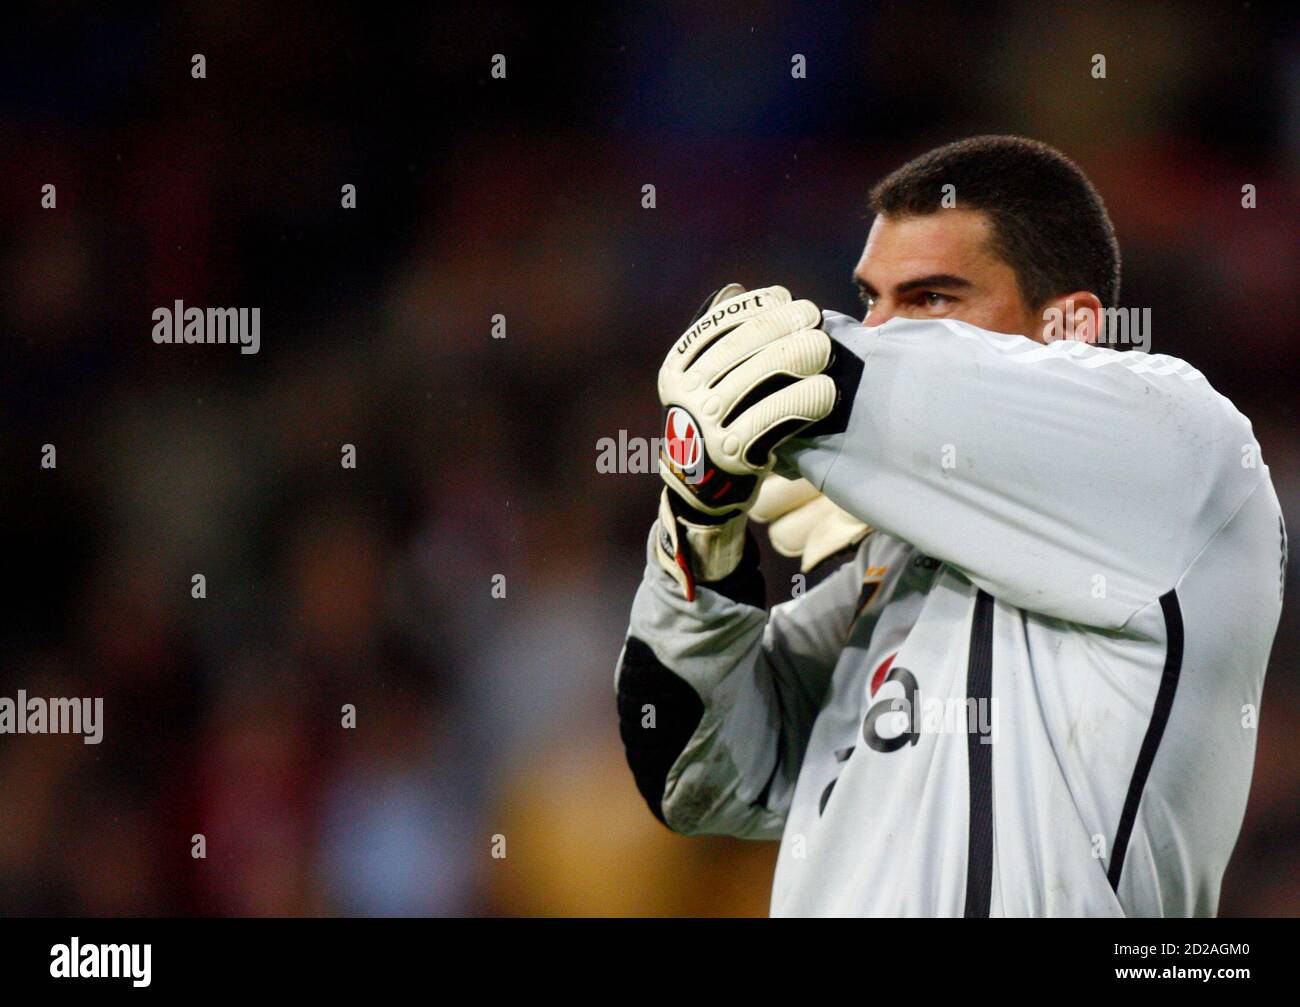 Galatasaray's goalkeeper Faryd Mondragon reacts after PSV Eindhoven scored  during their Champions League Group C soccer match at the Phillips stadium  in Eindhoven October 31, 2006. REUTERS/Jerry Lampen (NETHERLANDS Stock  Photo - Alamy